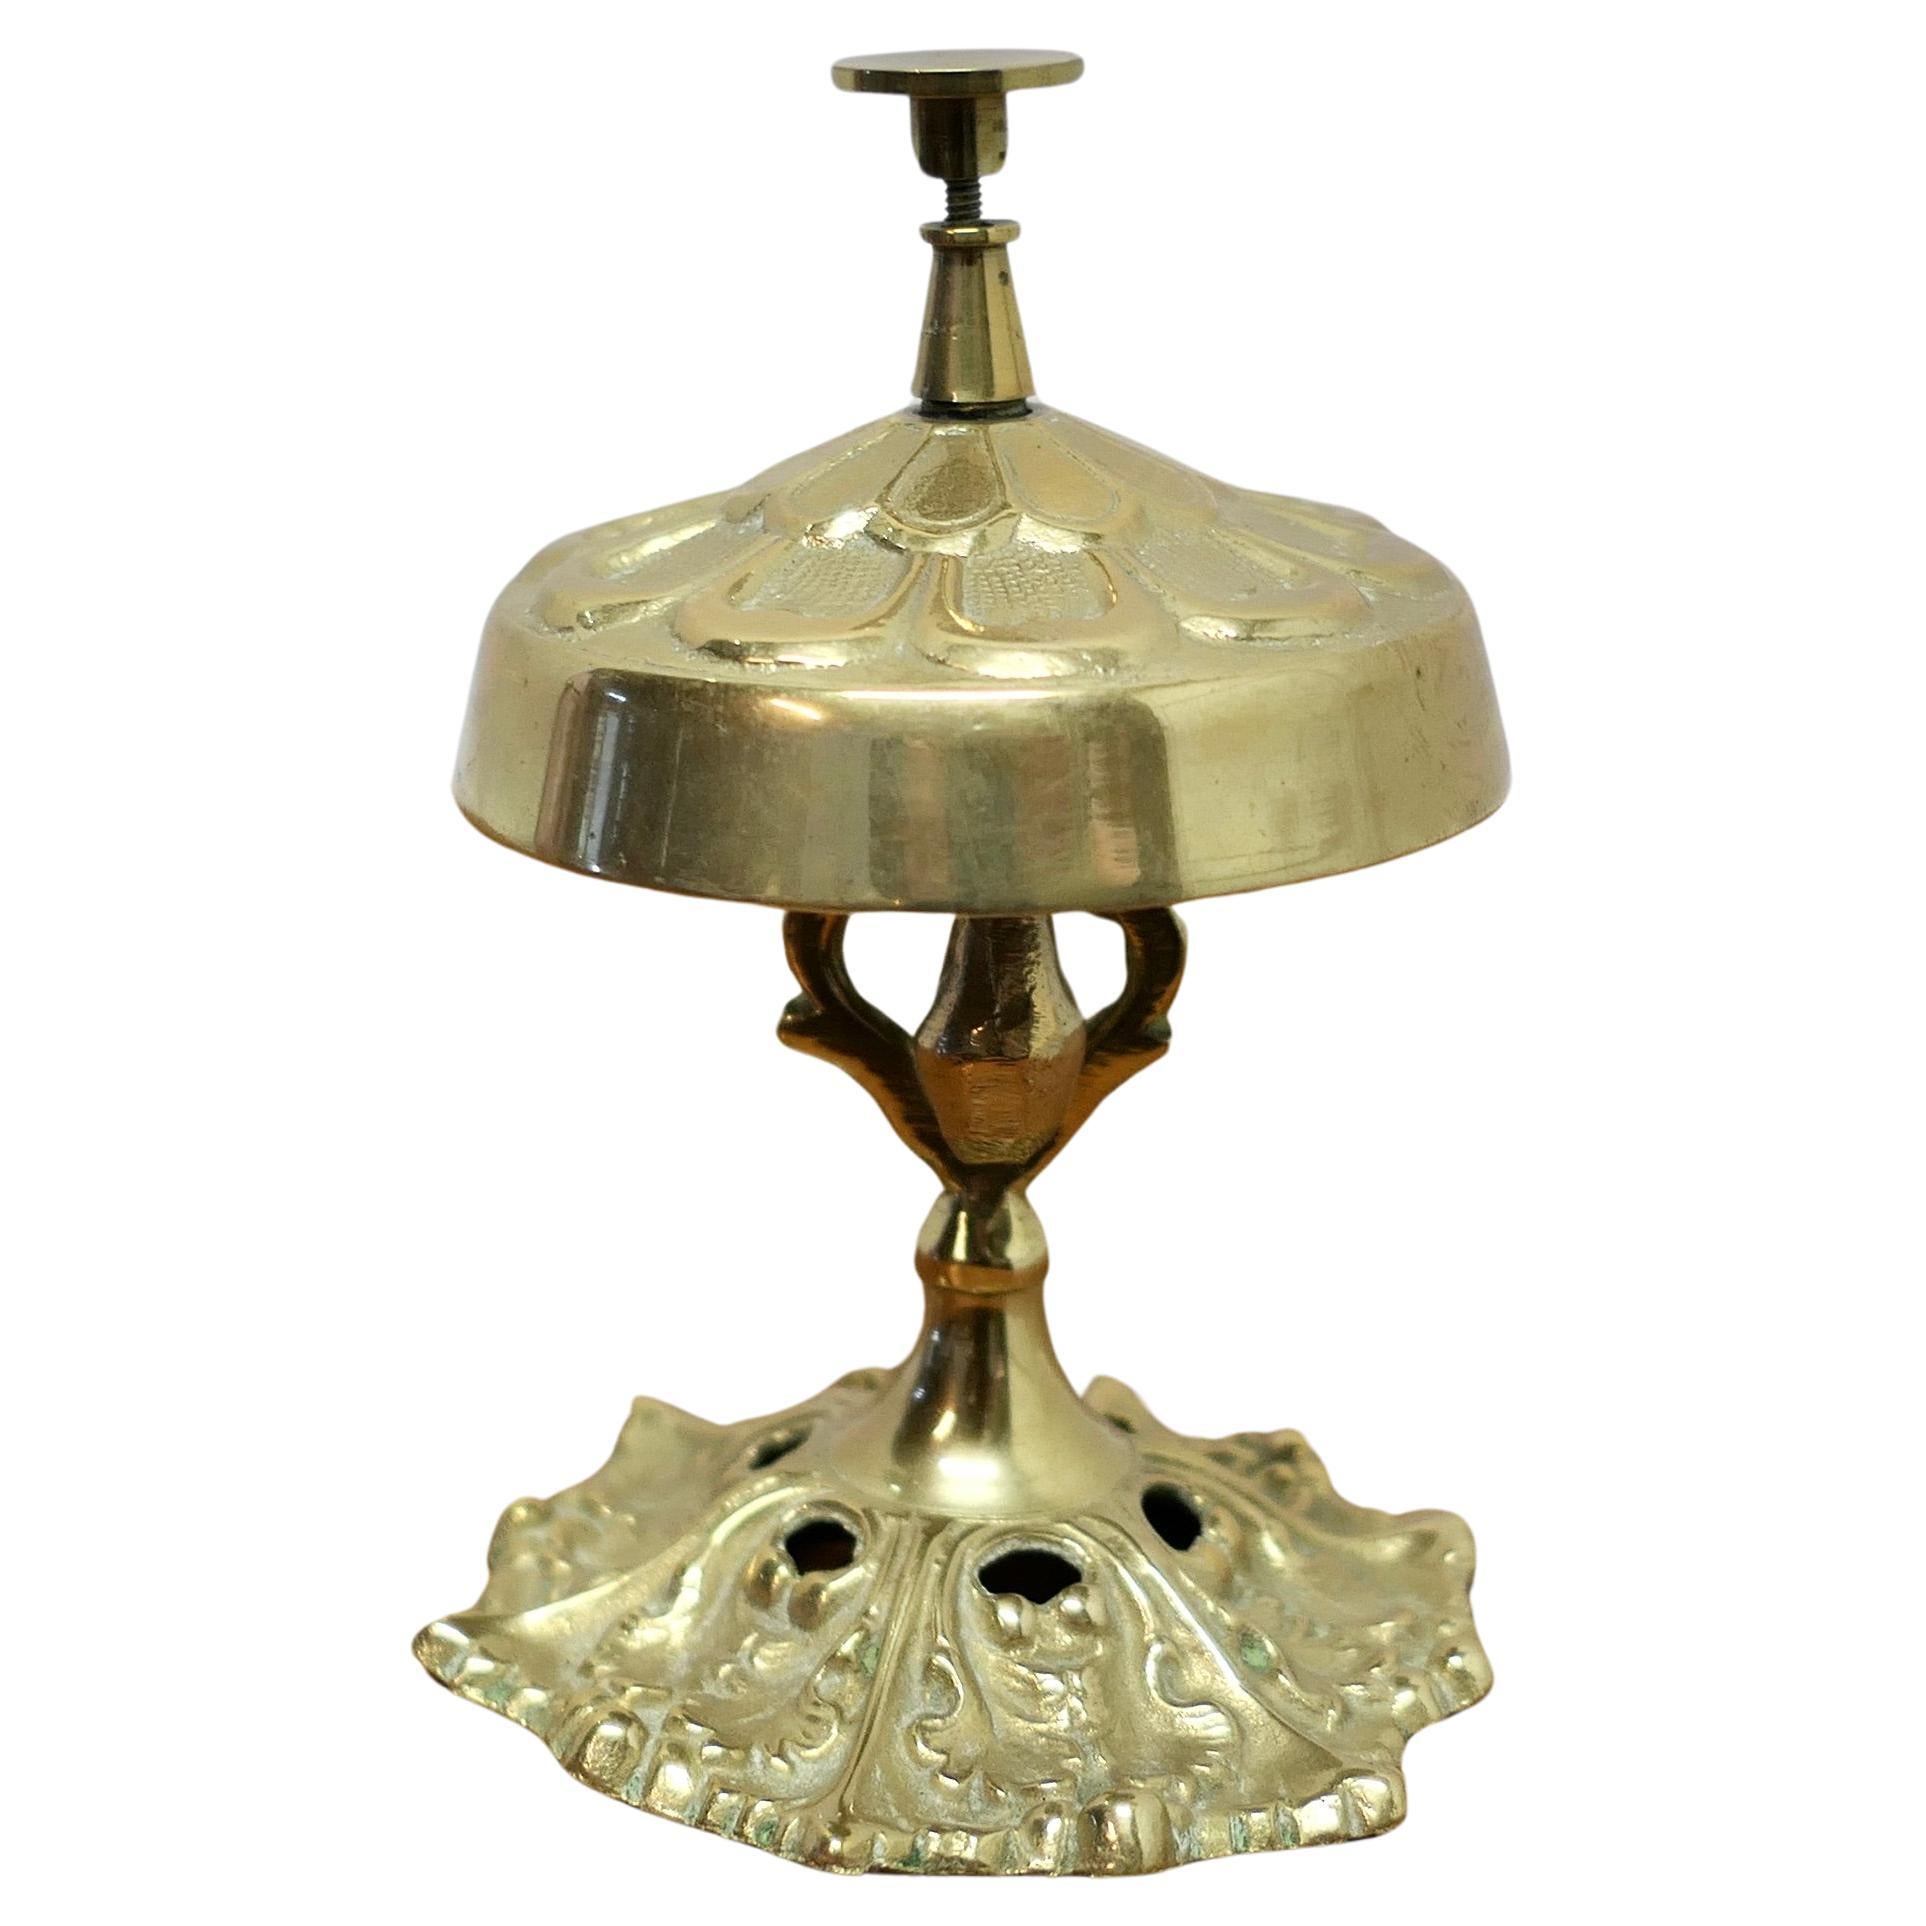 Decorative Brass Courtesy Counter Top Bell  Made in a floral style in solid bras